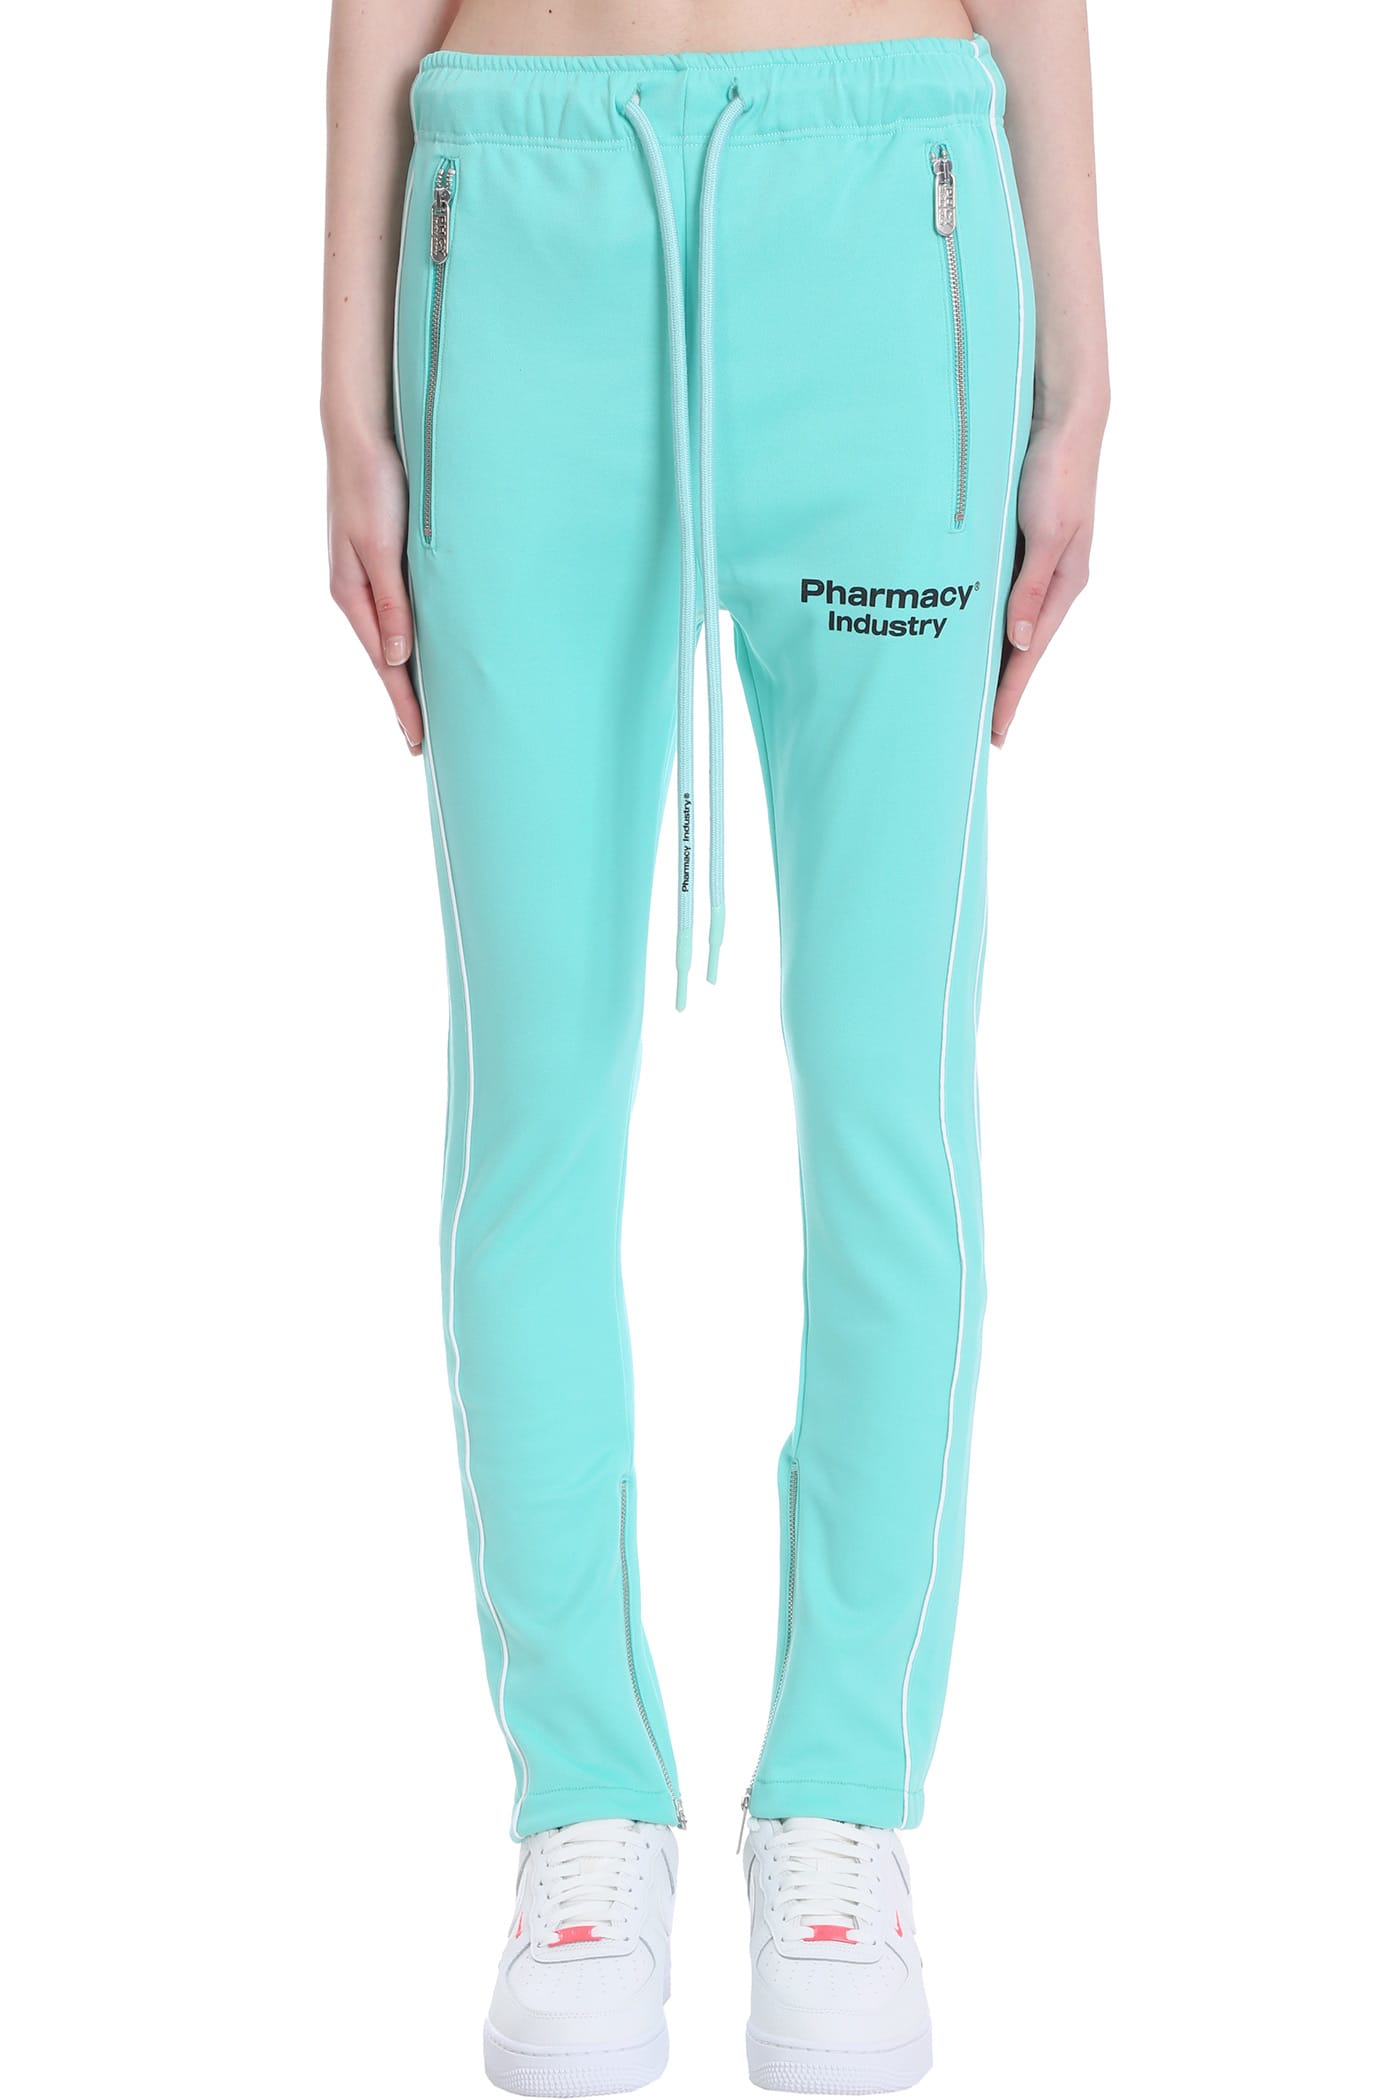 Pharmacy Industry Pants In Green Cotton